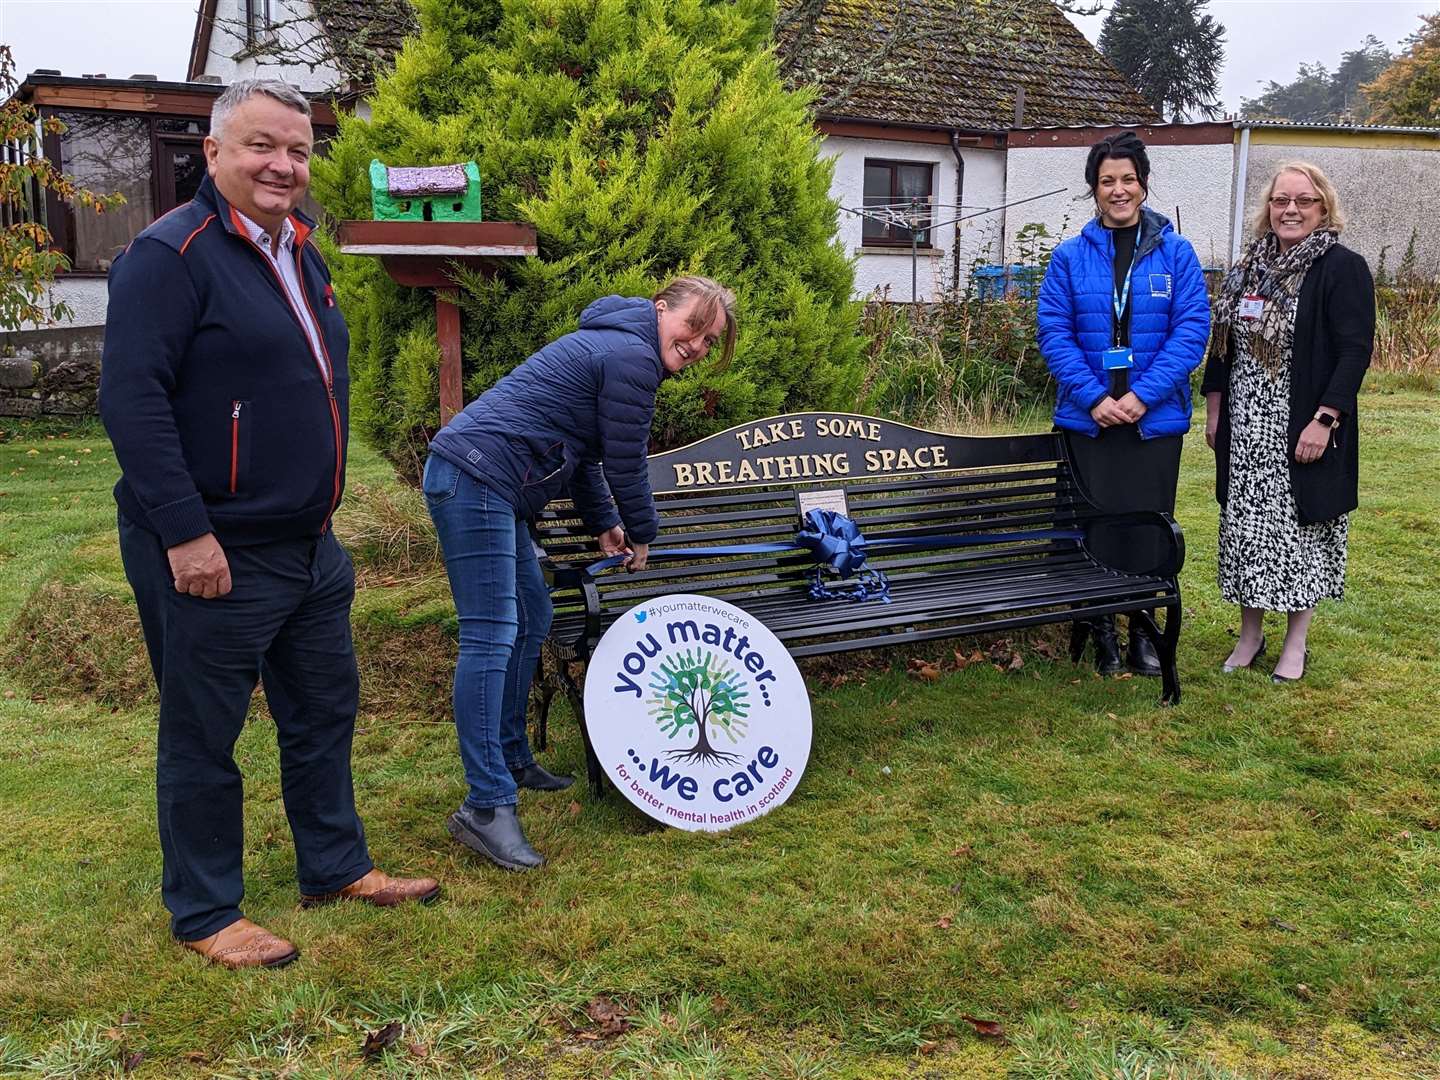 The 50th Take Some Breathing Space bench was unveiled at Support in Mind Scotland’s Gatehouse service in Golspie.